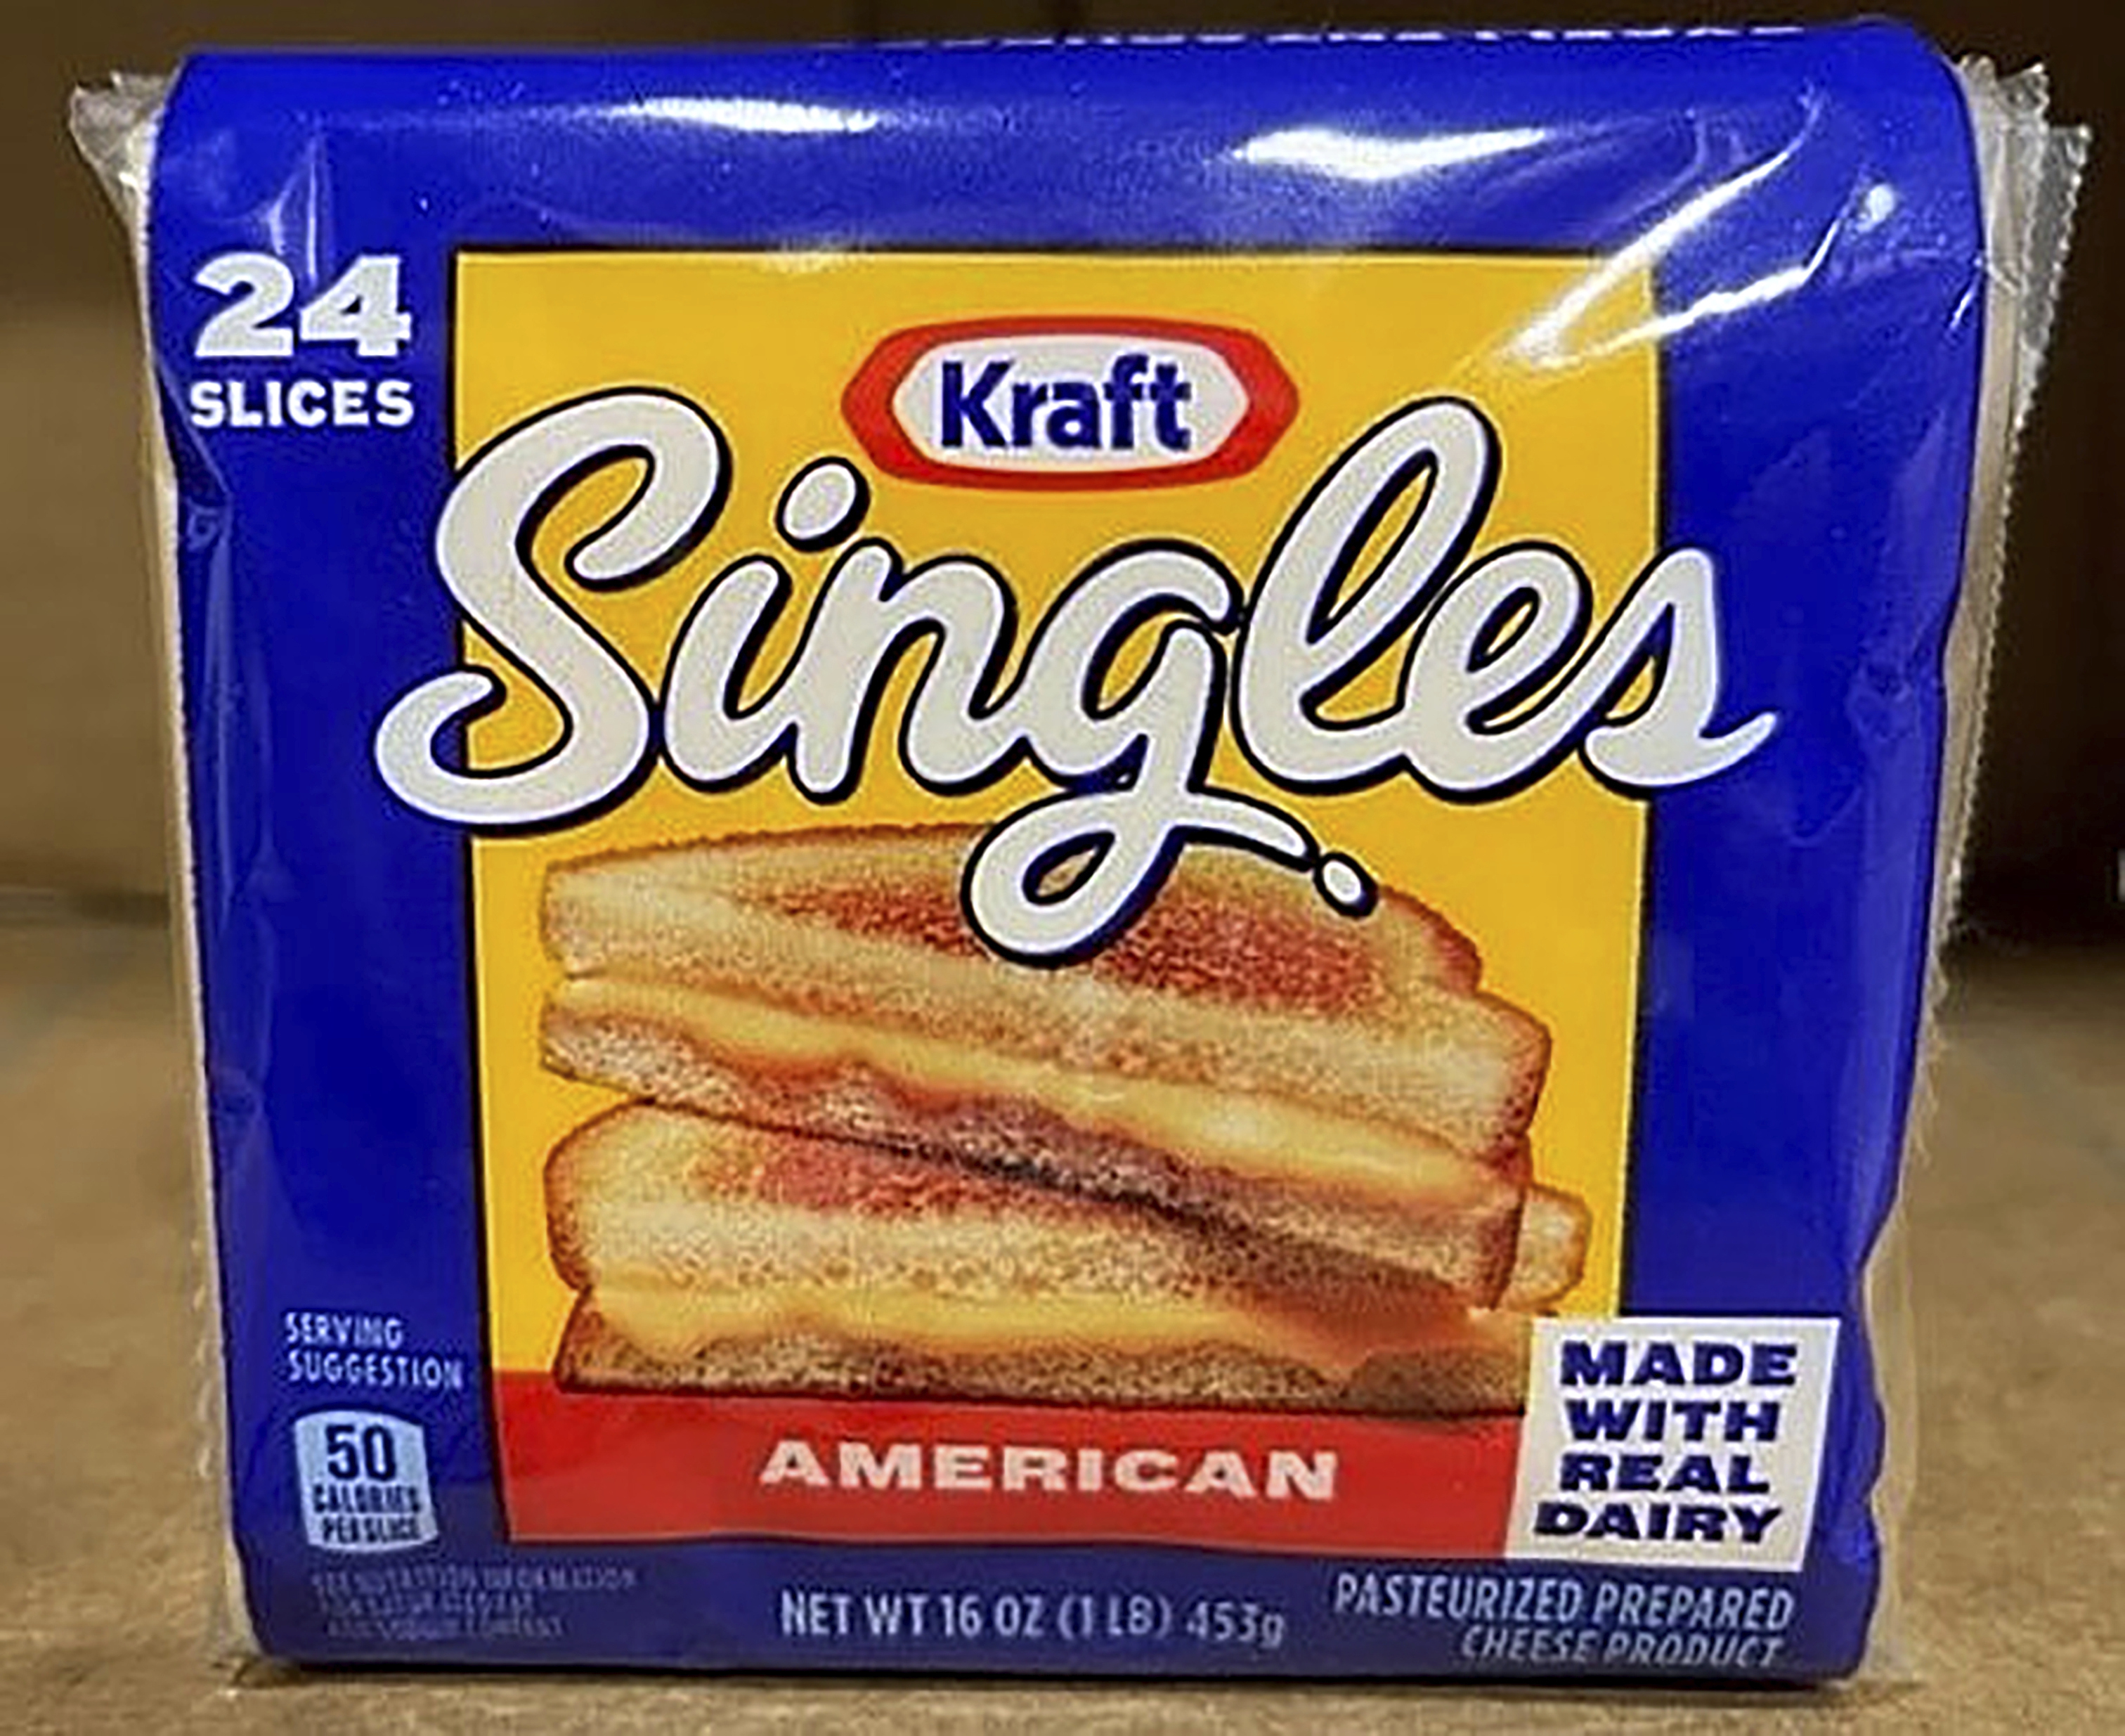 Kraft Heinz is recalling some American cheese slices because the wrappers  could pose choking hazard